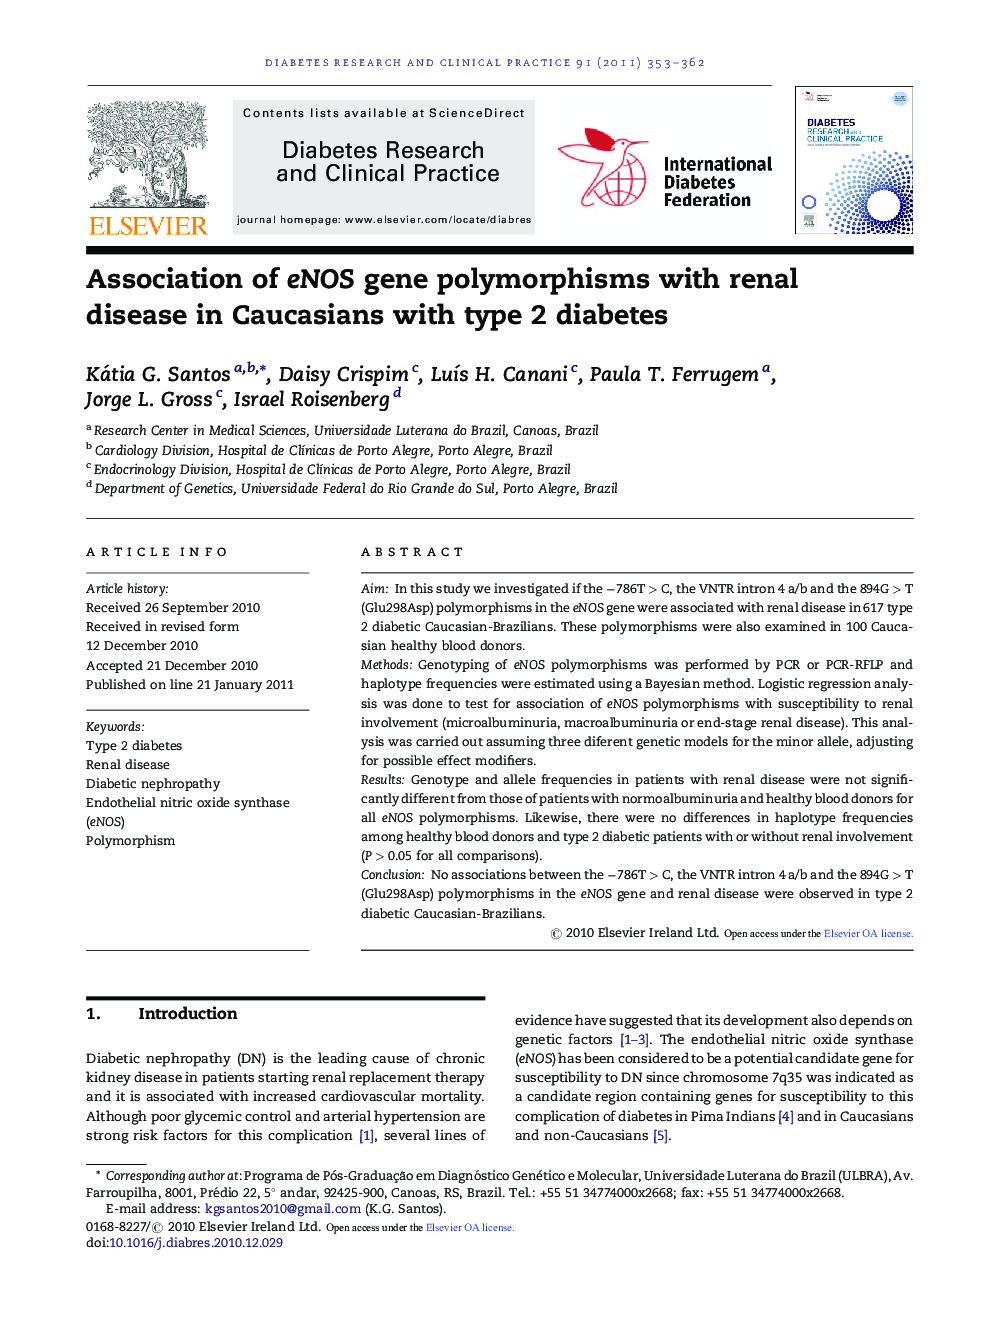 Association of eNOS gene polymorphisms with renal disease in Caucasians with type 2 diabetes